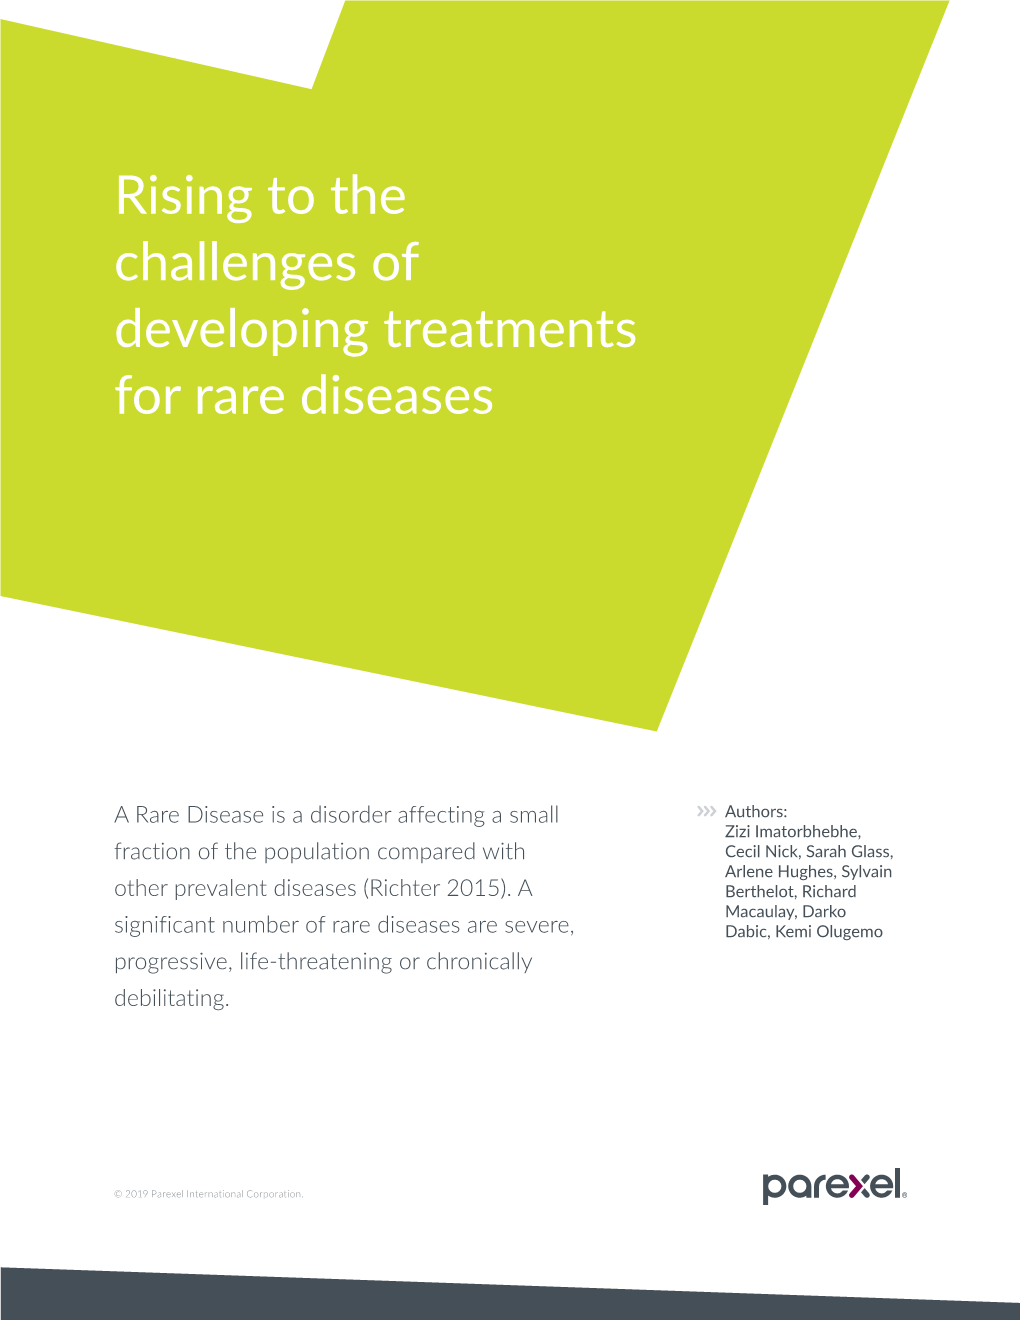 Rising to the Challenges of Developing Treatments for Rare Diseases